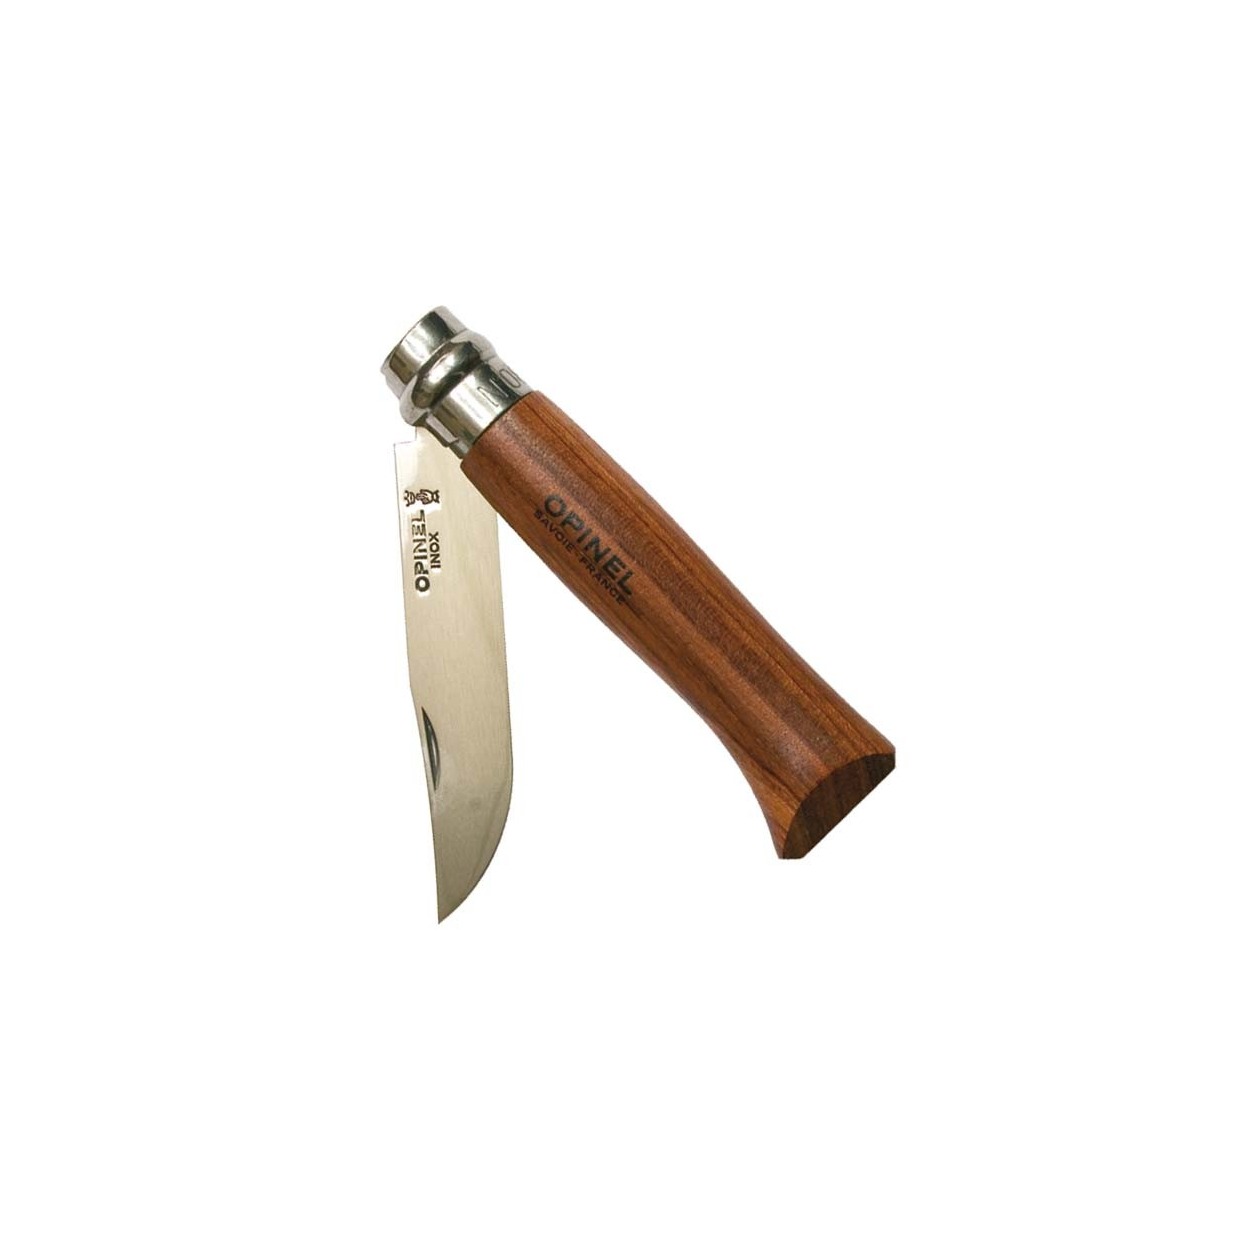 OPINEL LUXE N°8 MANCHE BOIS EXOTIQUE 973.08 